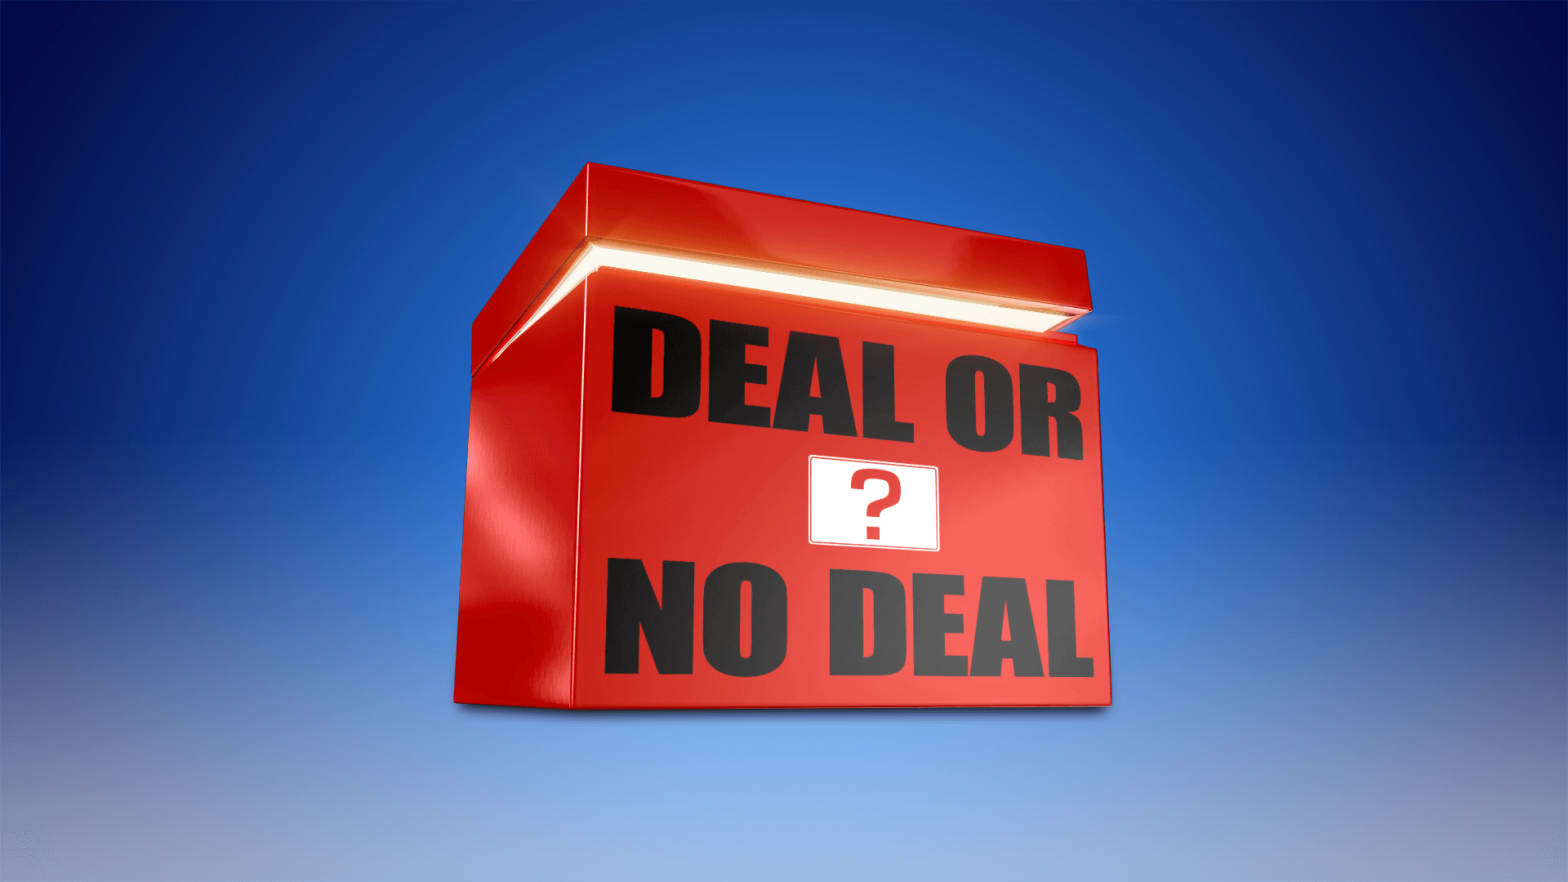 Play Deal Or No Deal Online: Here’s how